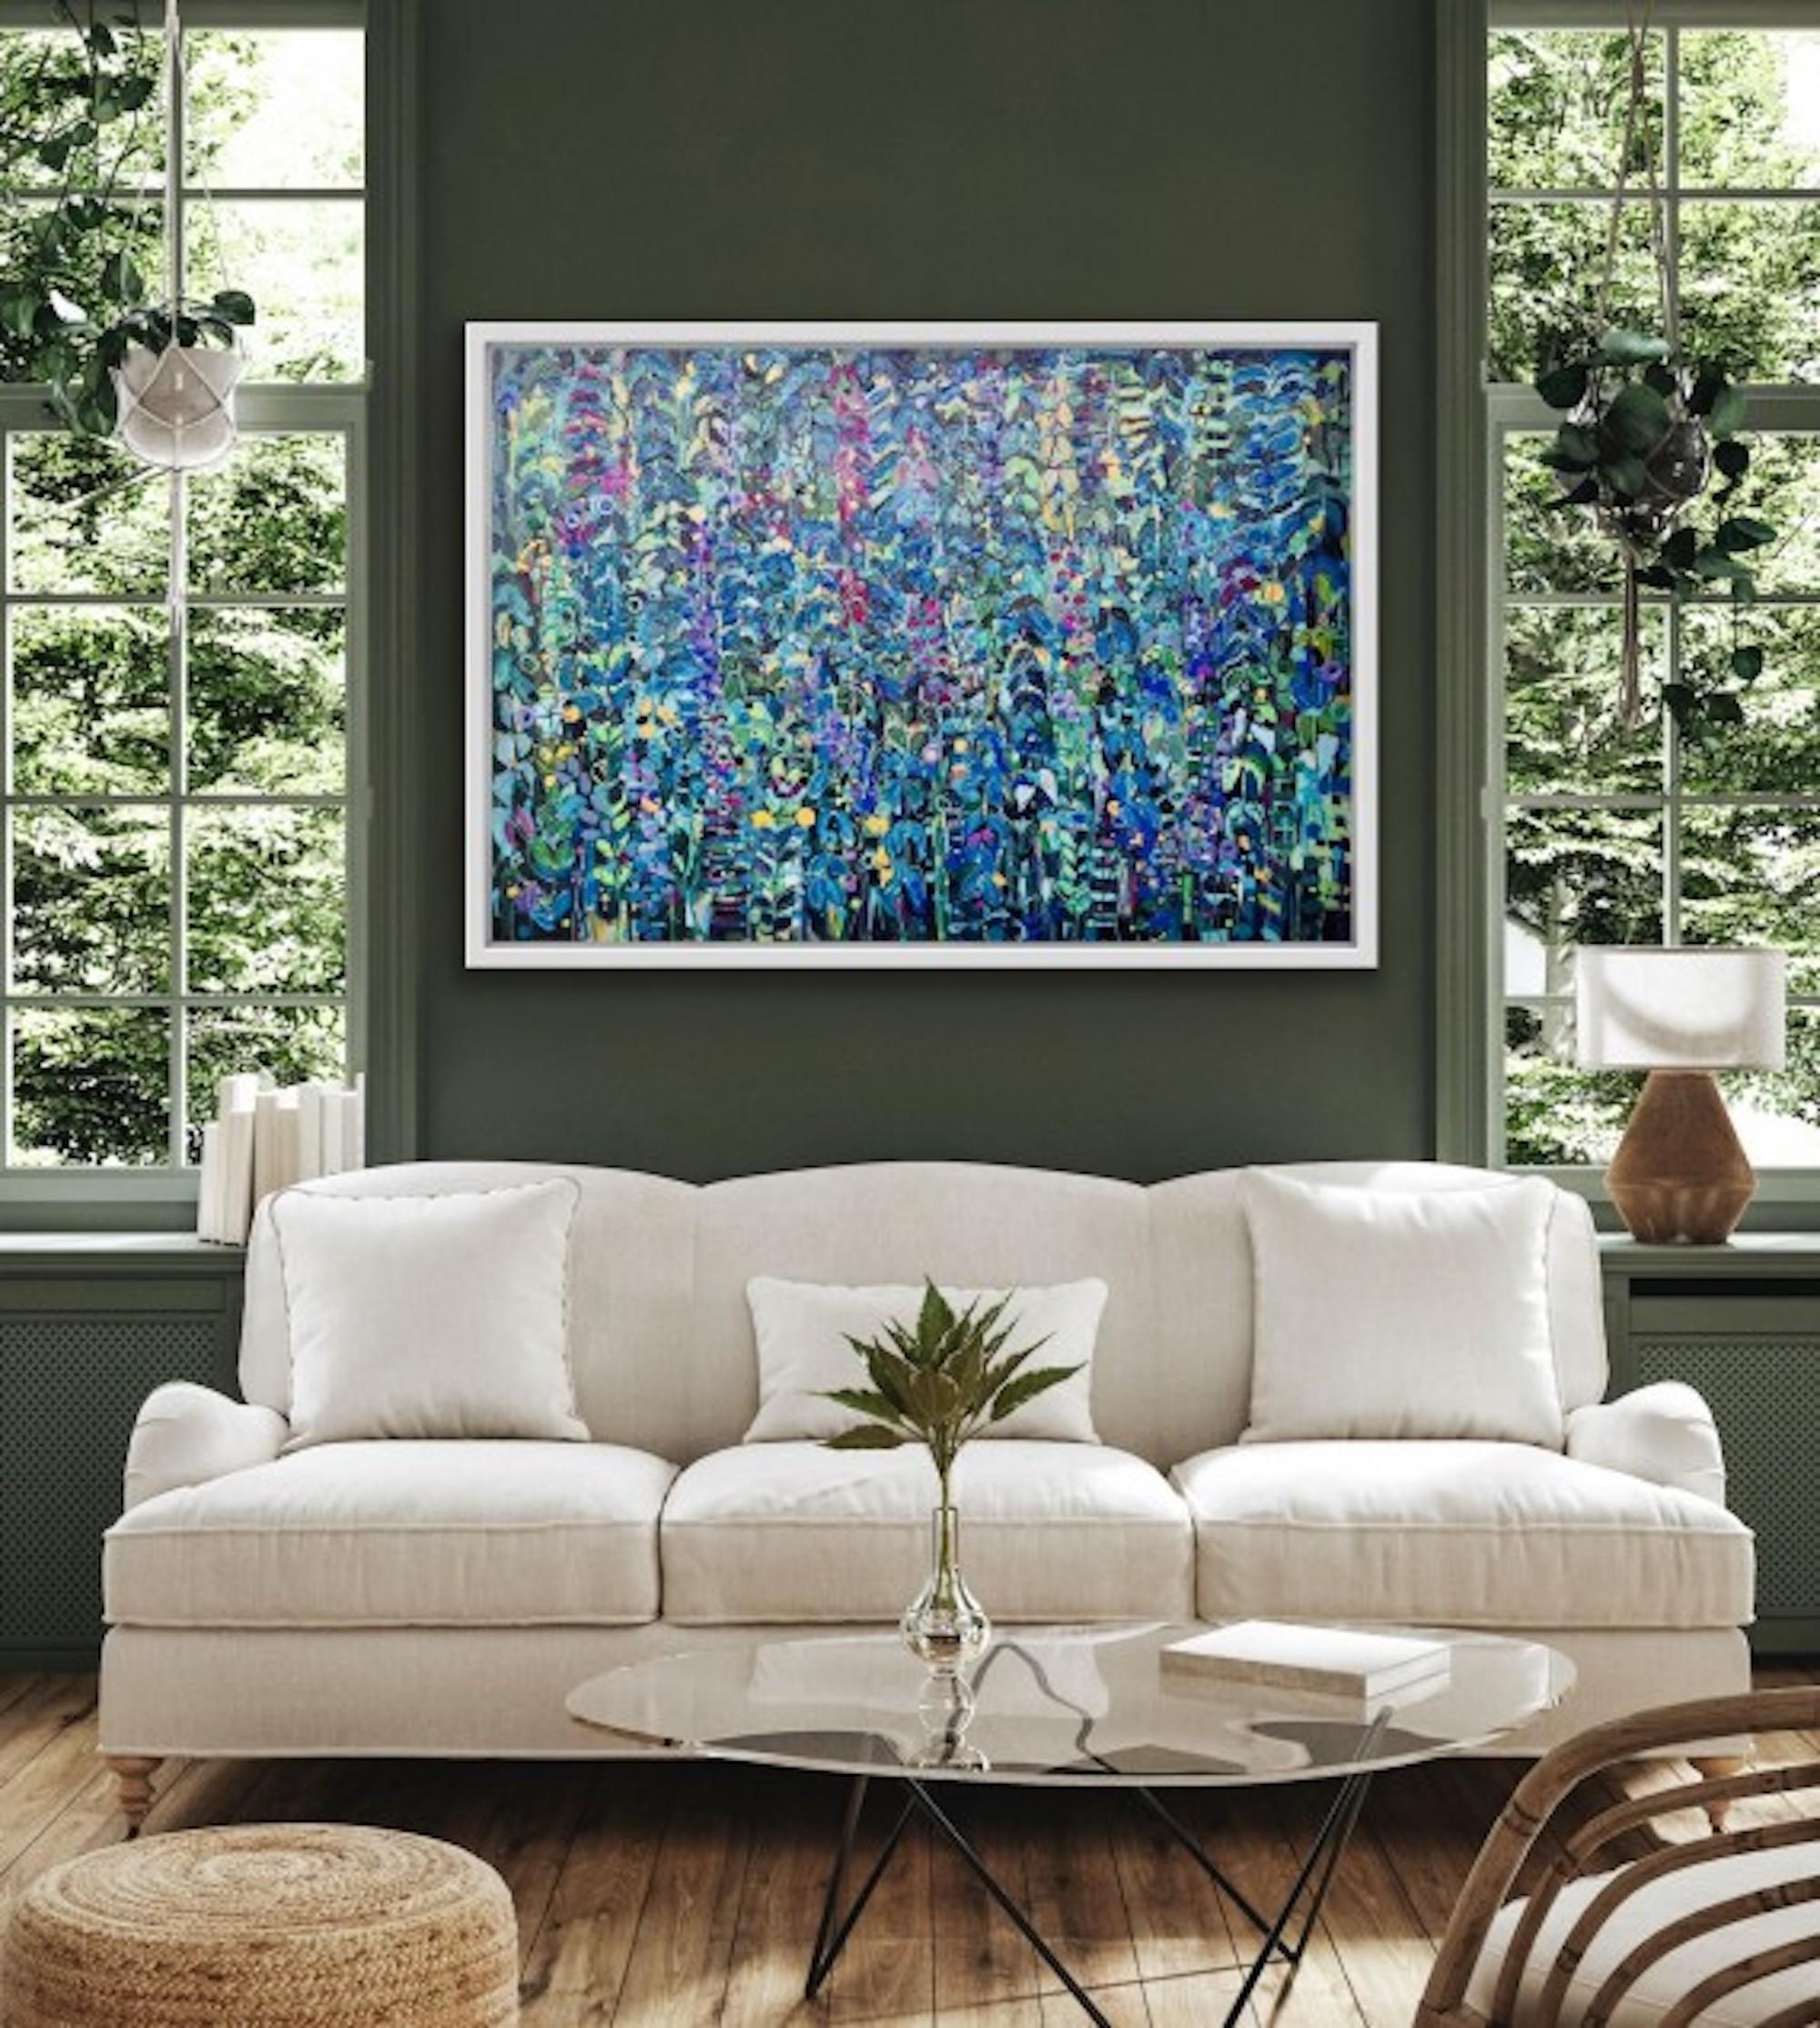 Purple & Blue Tangle, Vibrant Floral Painting, Artwork Inspired by Nature - Gold Abstract Painting by Catherine Ruth Church